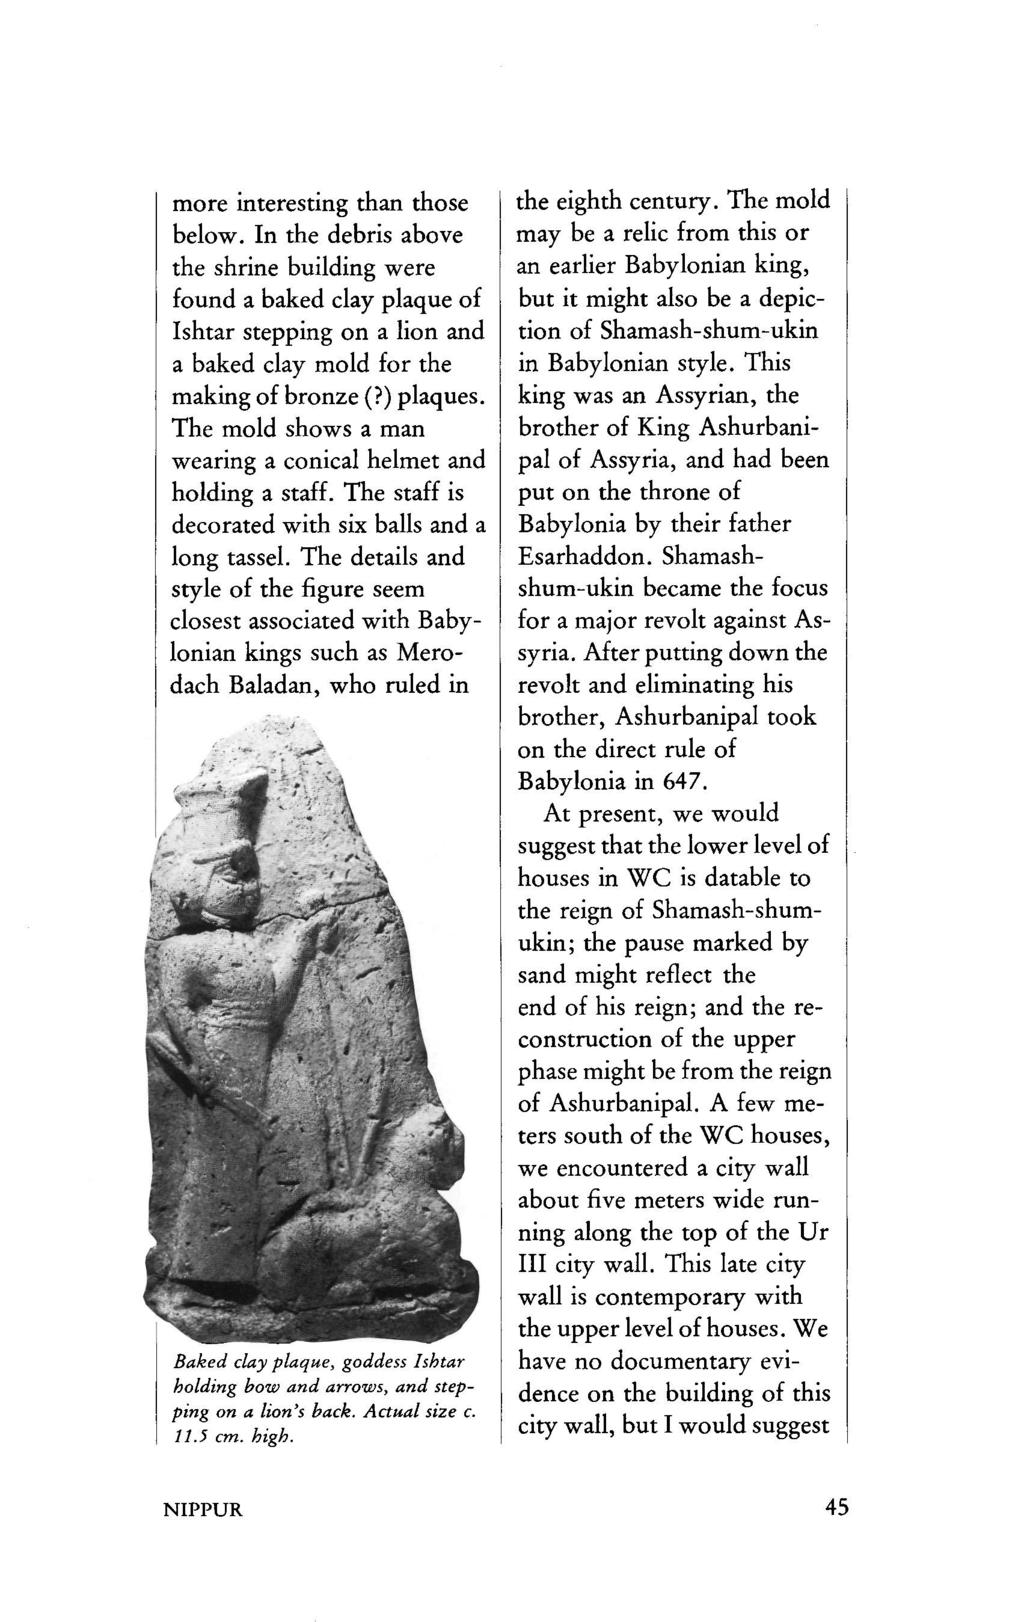 more interesting than those below. In the debris above the shrine building were found a baked clay plaque of Ishtar stepping on a lion and a baked clay mold for the making of bronze (?) plaques.